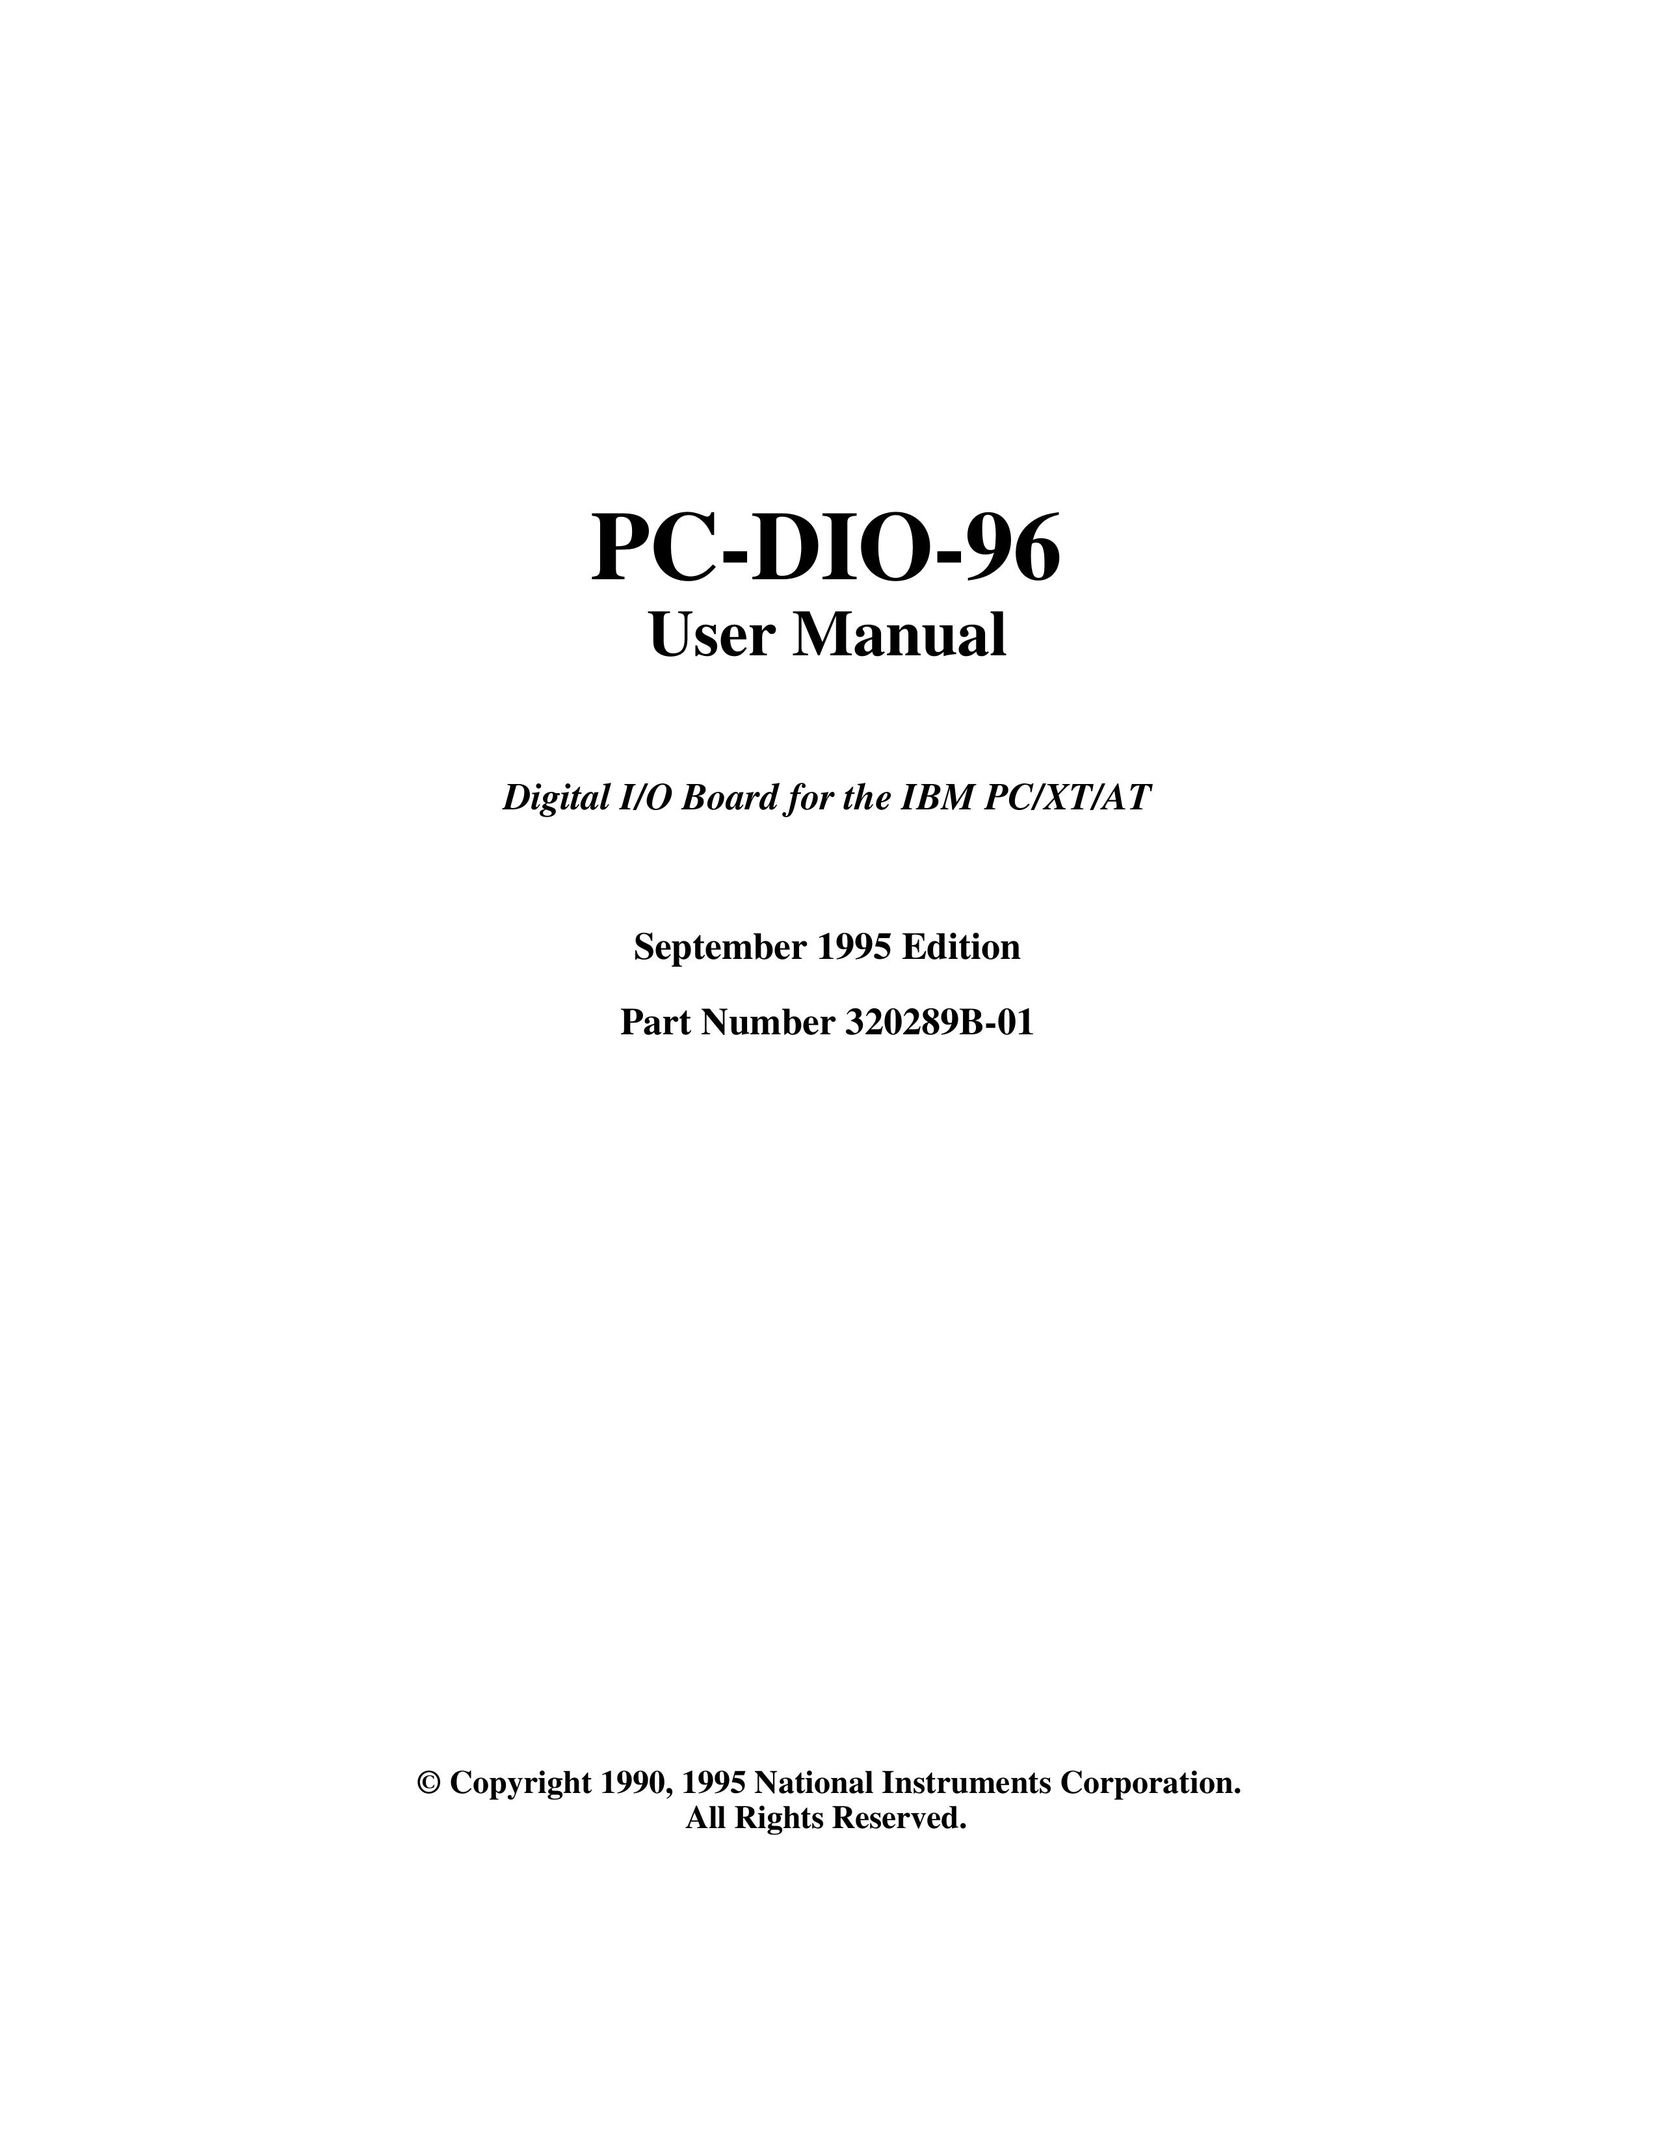 National Instruments PC-DIO-96 Switch User Manual